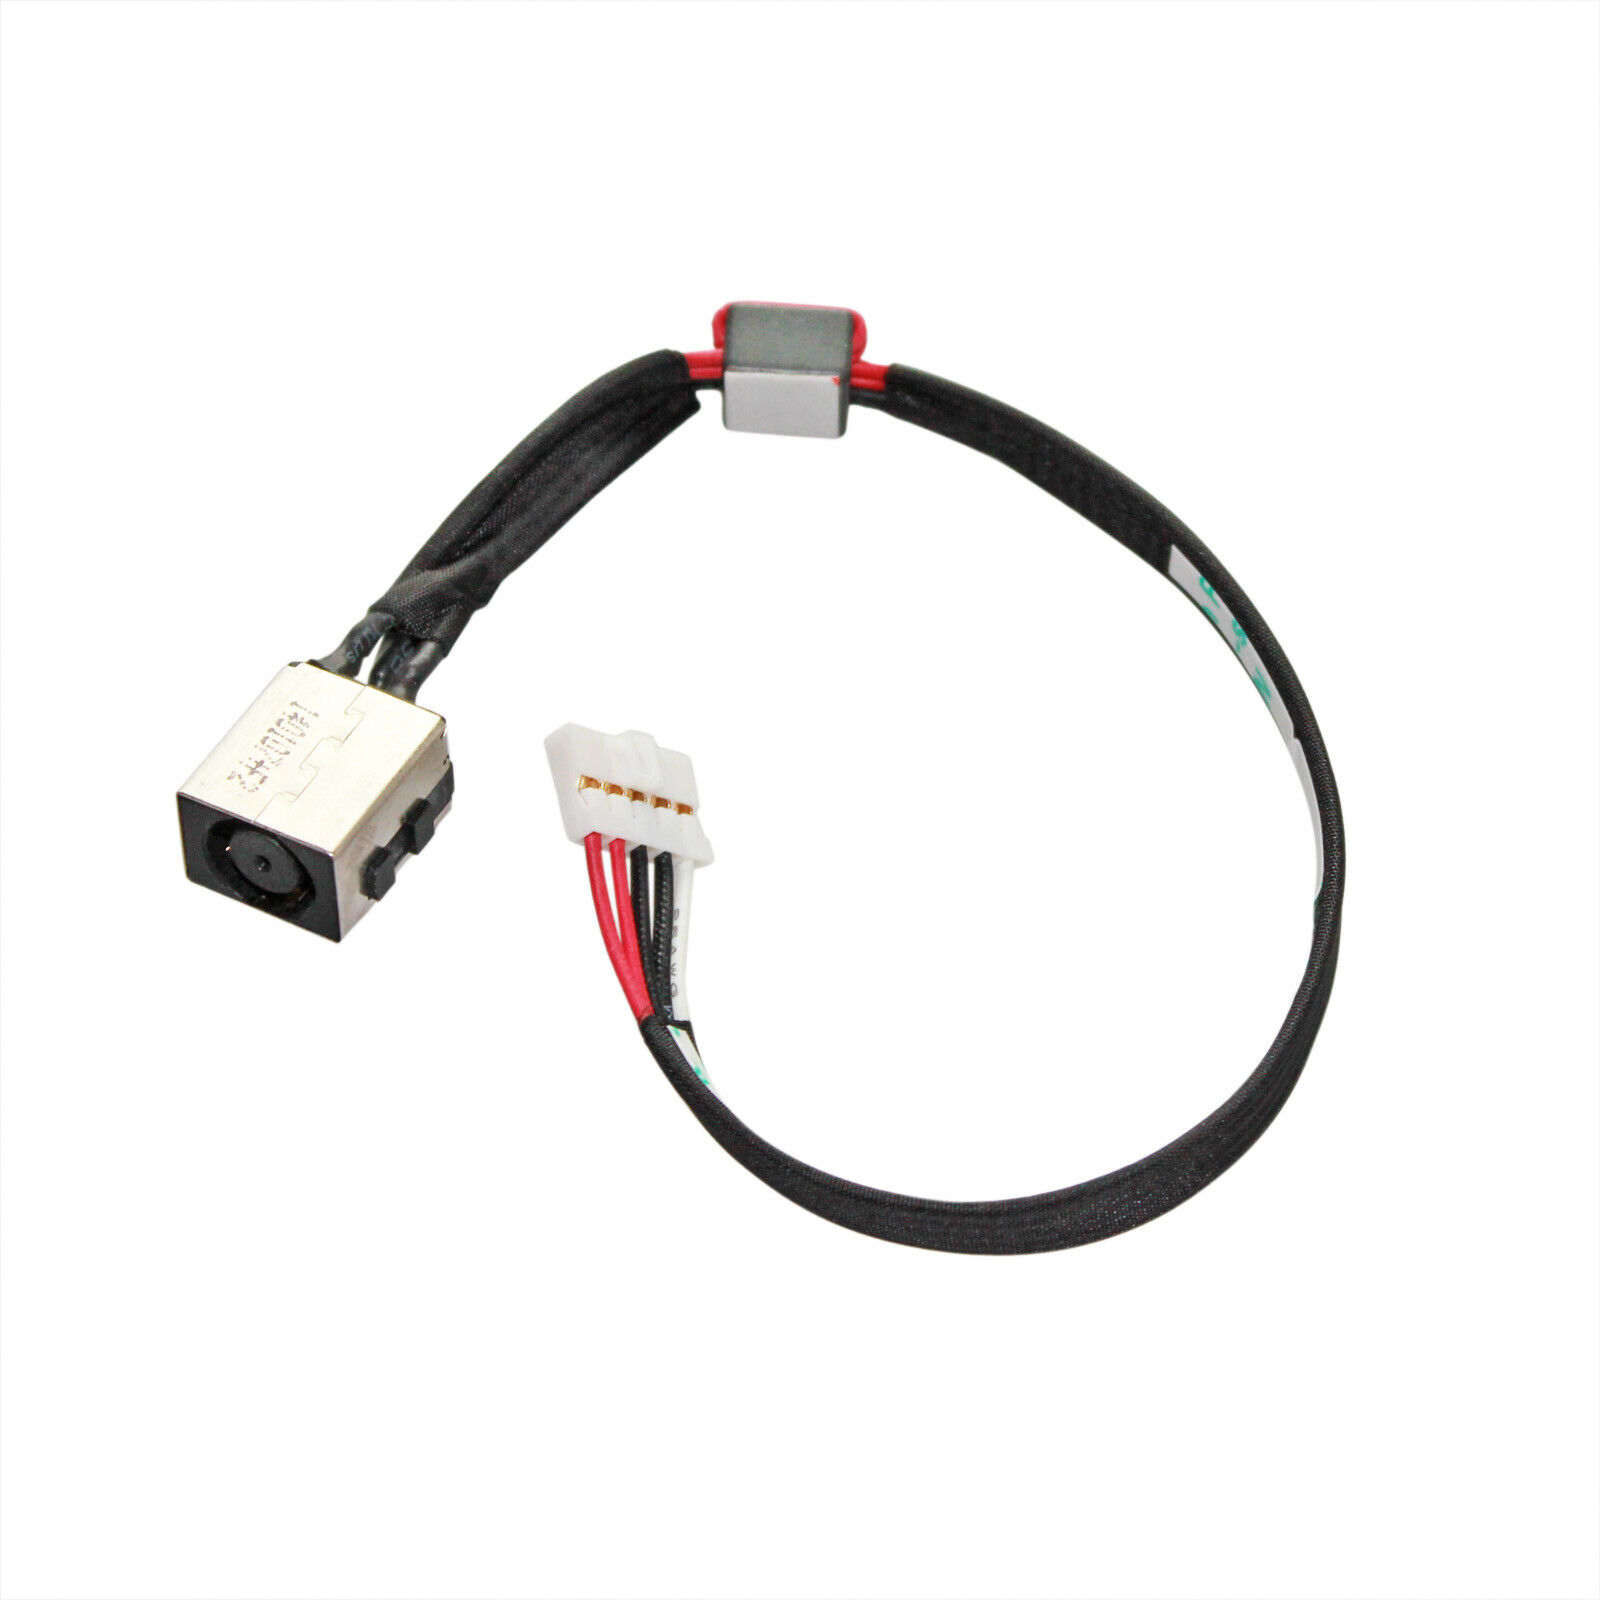  Dell Inspiron 15 5542 5543 5545 5547 5548 P39F DC Power Jack Charging PortReplacement Sale in Trinidad